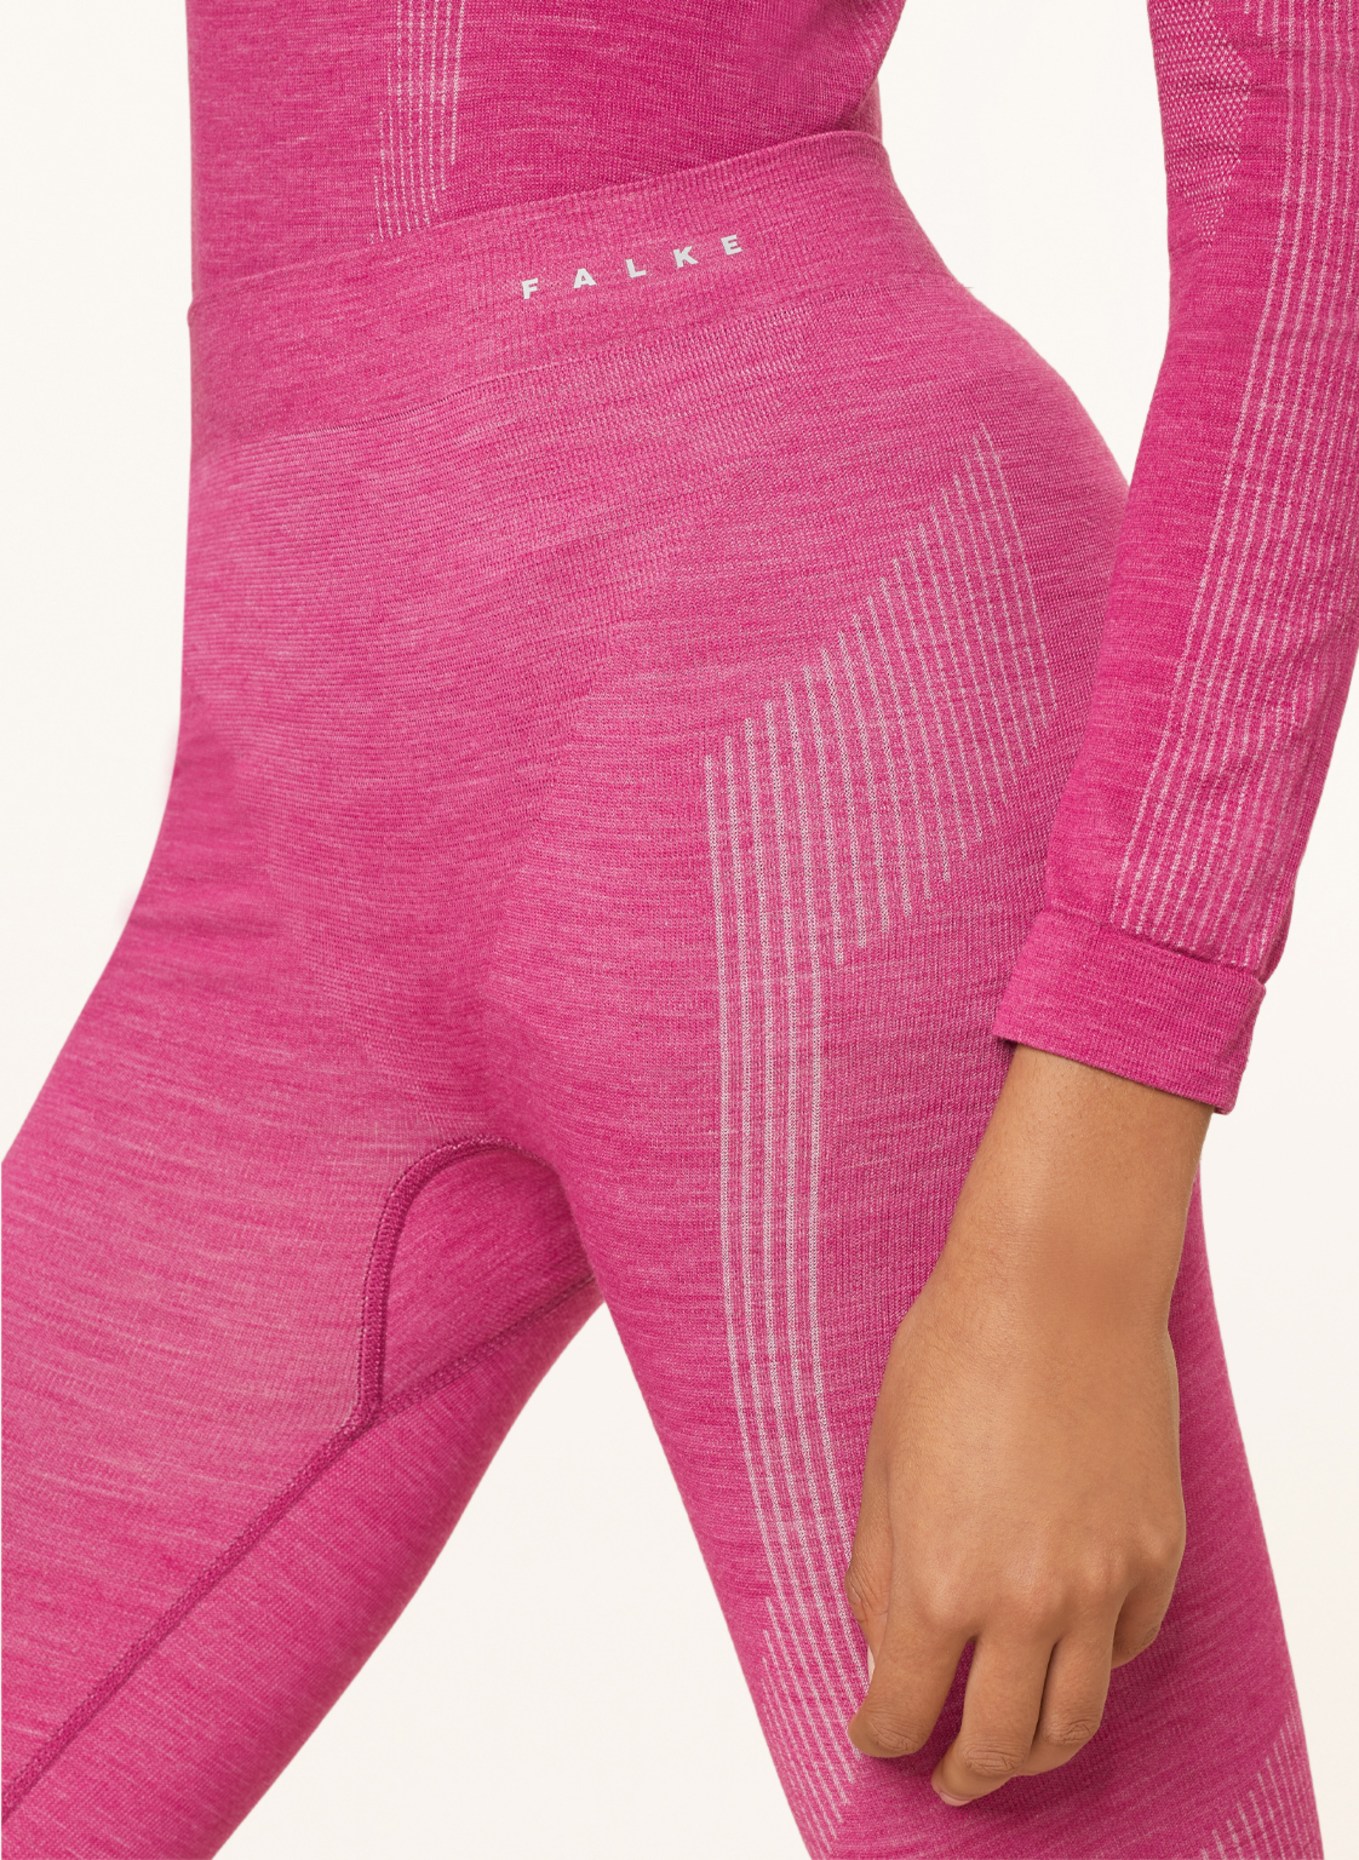 FALKE Functional base layer trousers WOOL-TECH with merino wool, Color: PINK (Image 5)